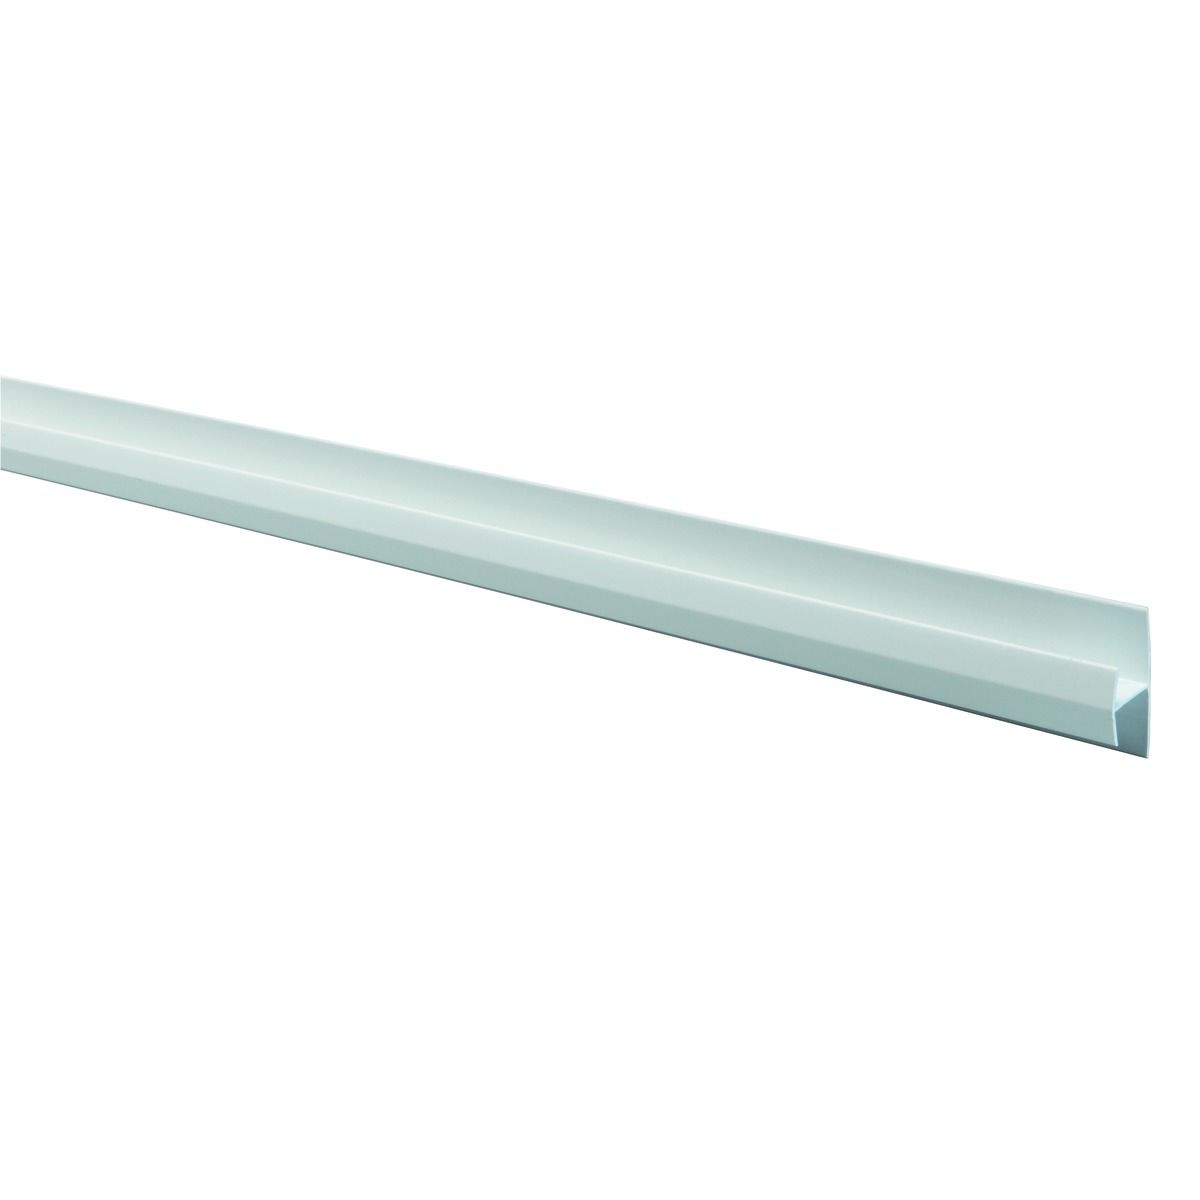 Image of Wickes PVCu White Soffit Butt Joint Trim - 2500mm